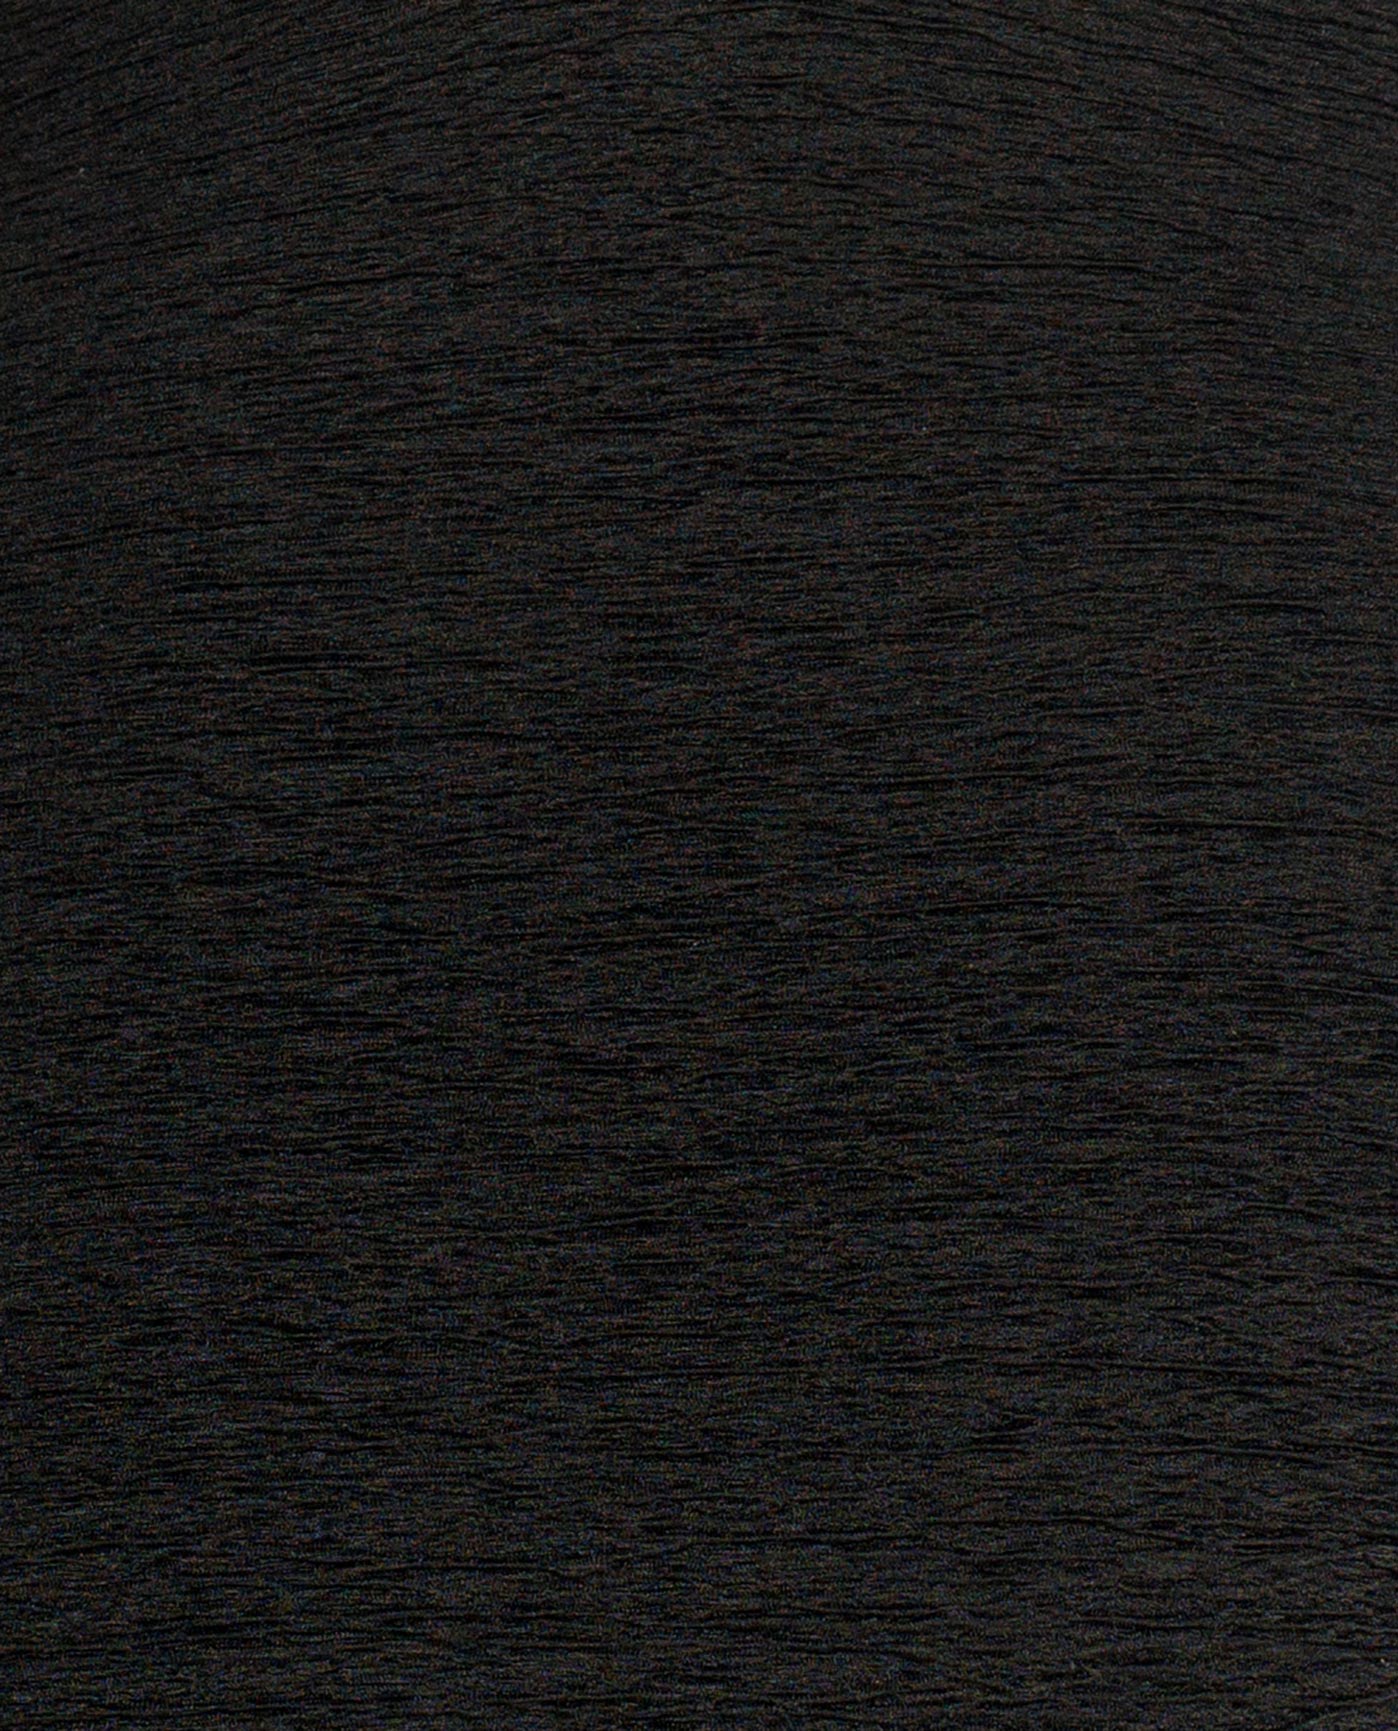 FABRIC SWATCH VIEW OF CHLORINE RESISTANT KRINKLE TEXTURED SOLID HIGH BACK PLUS SIZE TANKINI SET | KRINKLE BLACK 2023